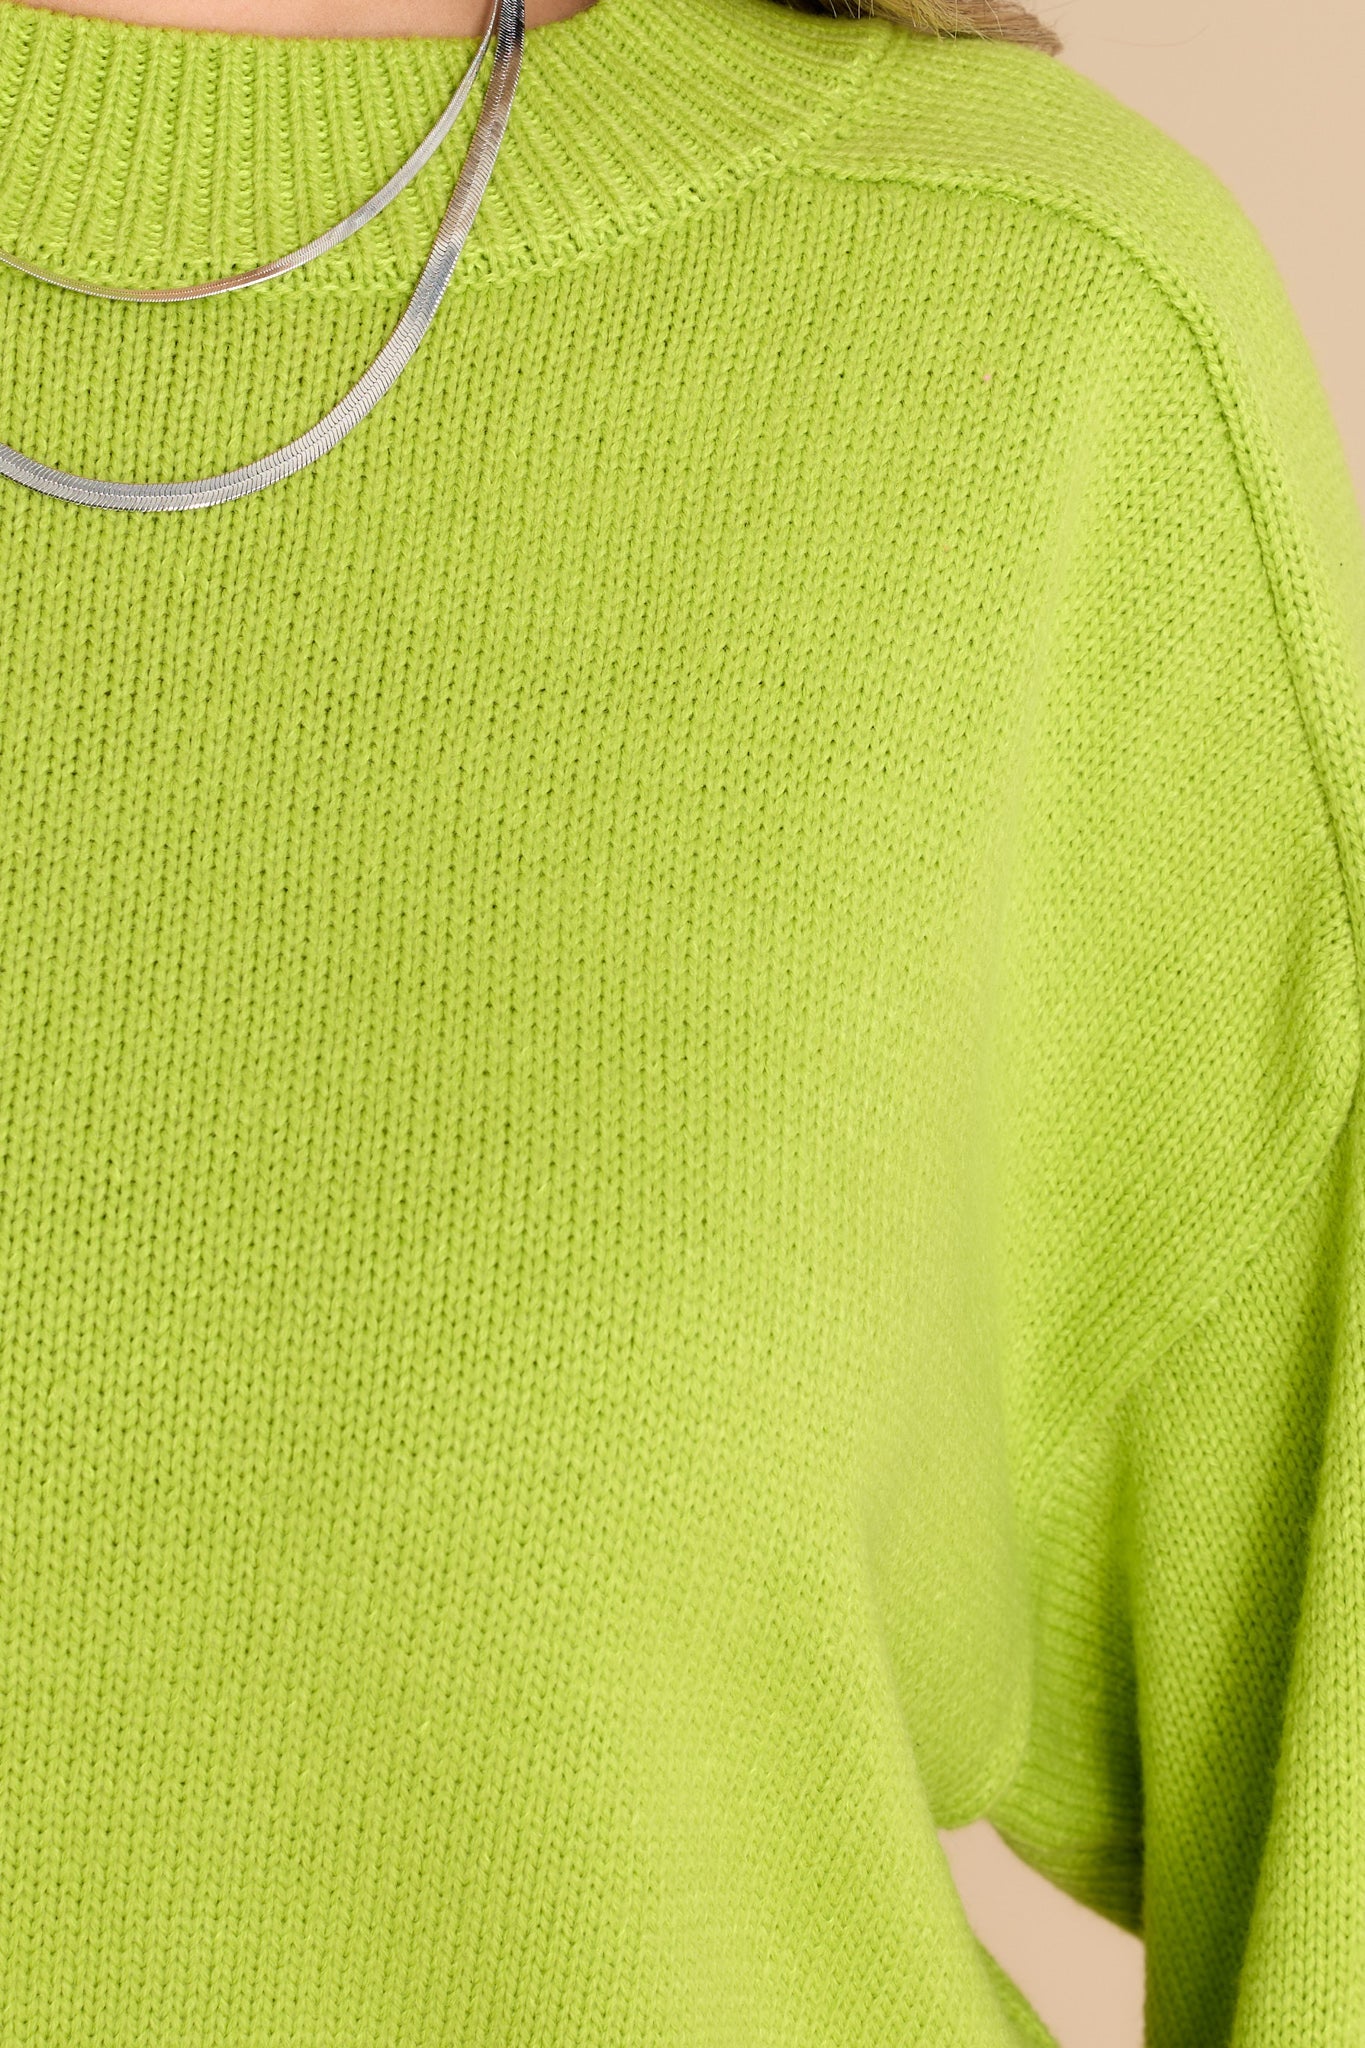 She Stands Out Lime Green Sweater - Red Dress